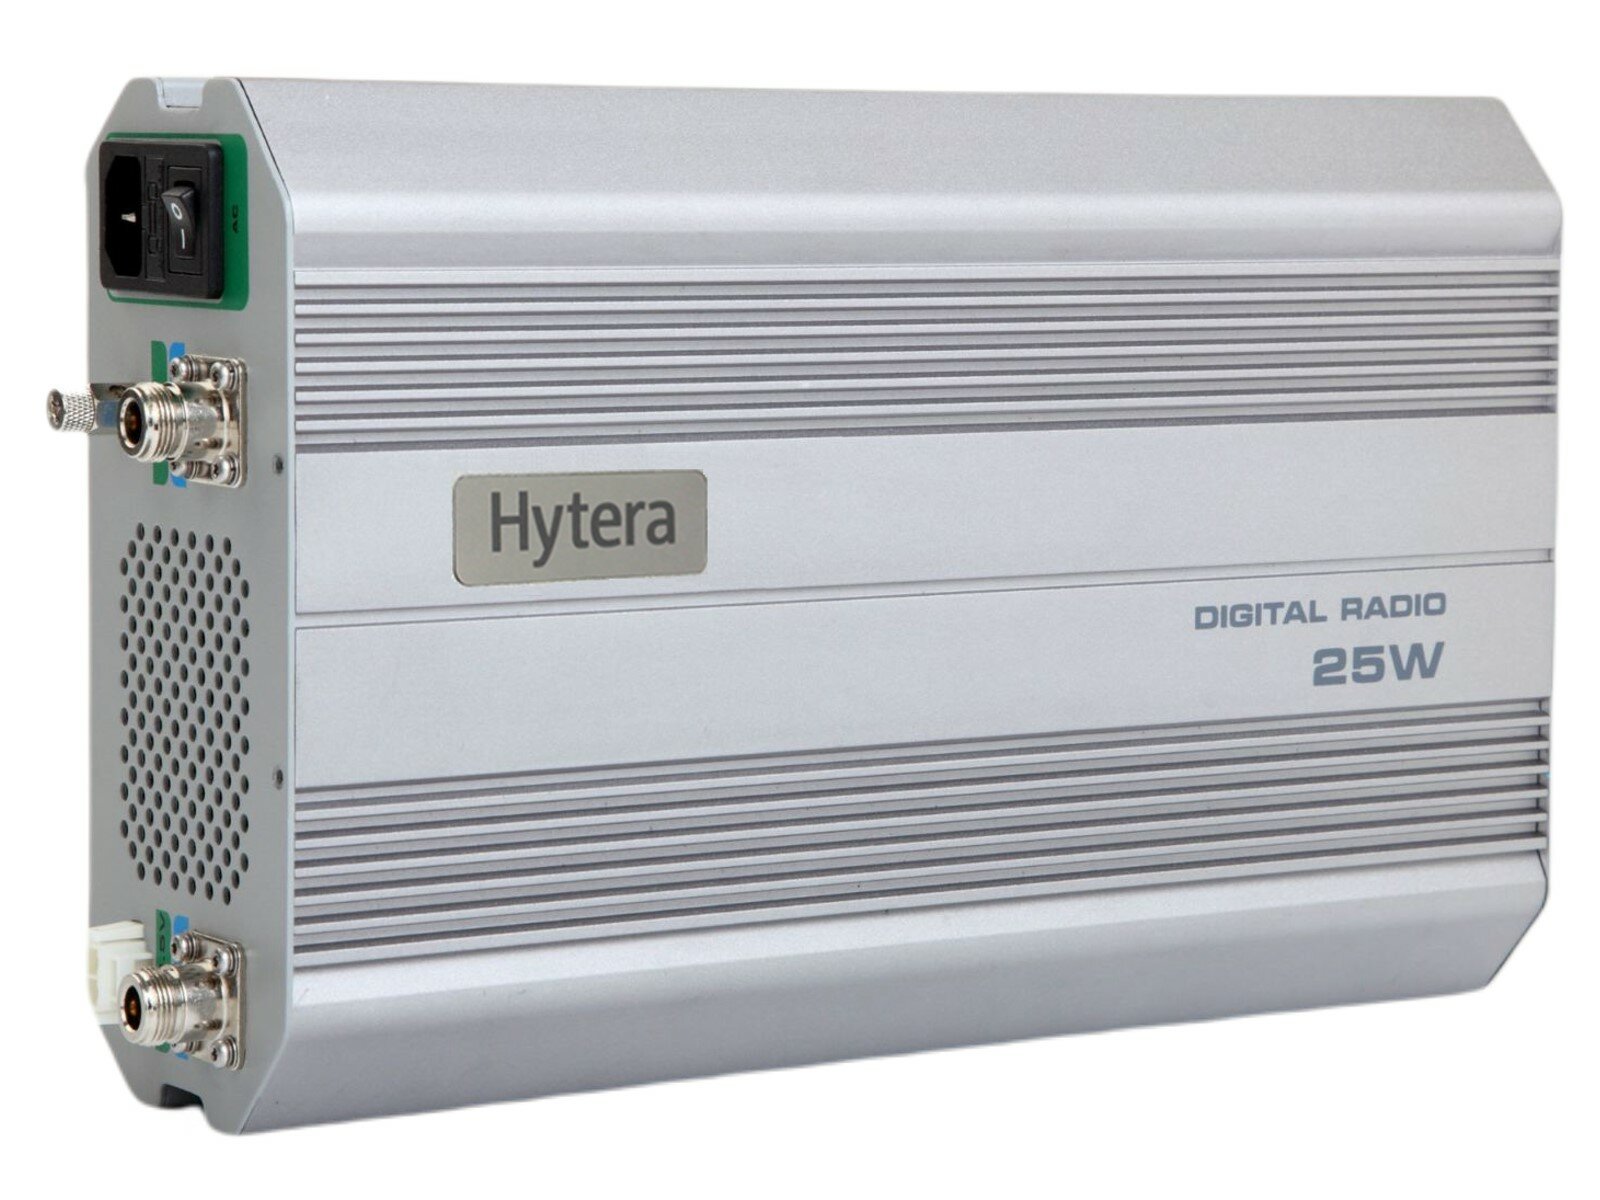 Hytera RD625 DMR Compact Repeater